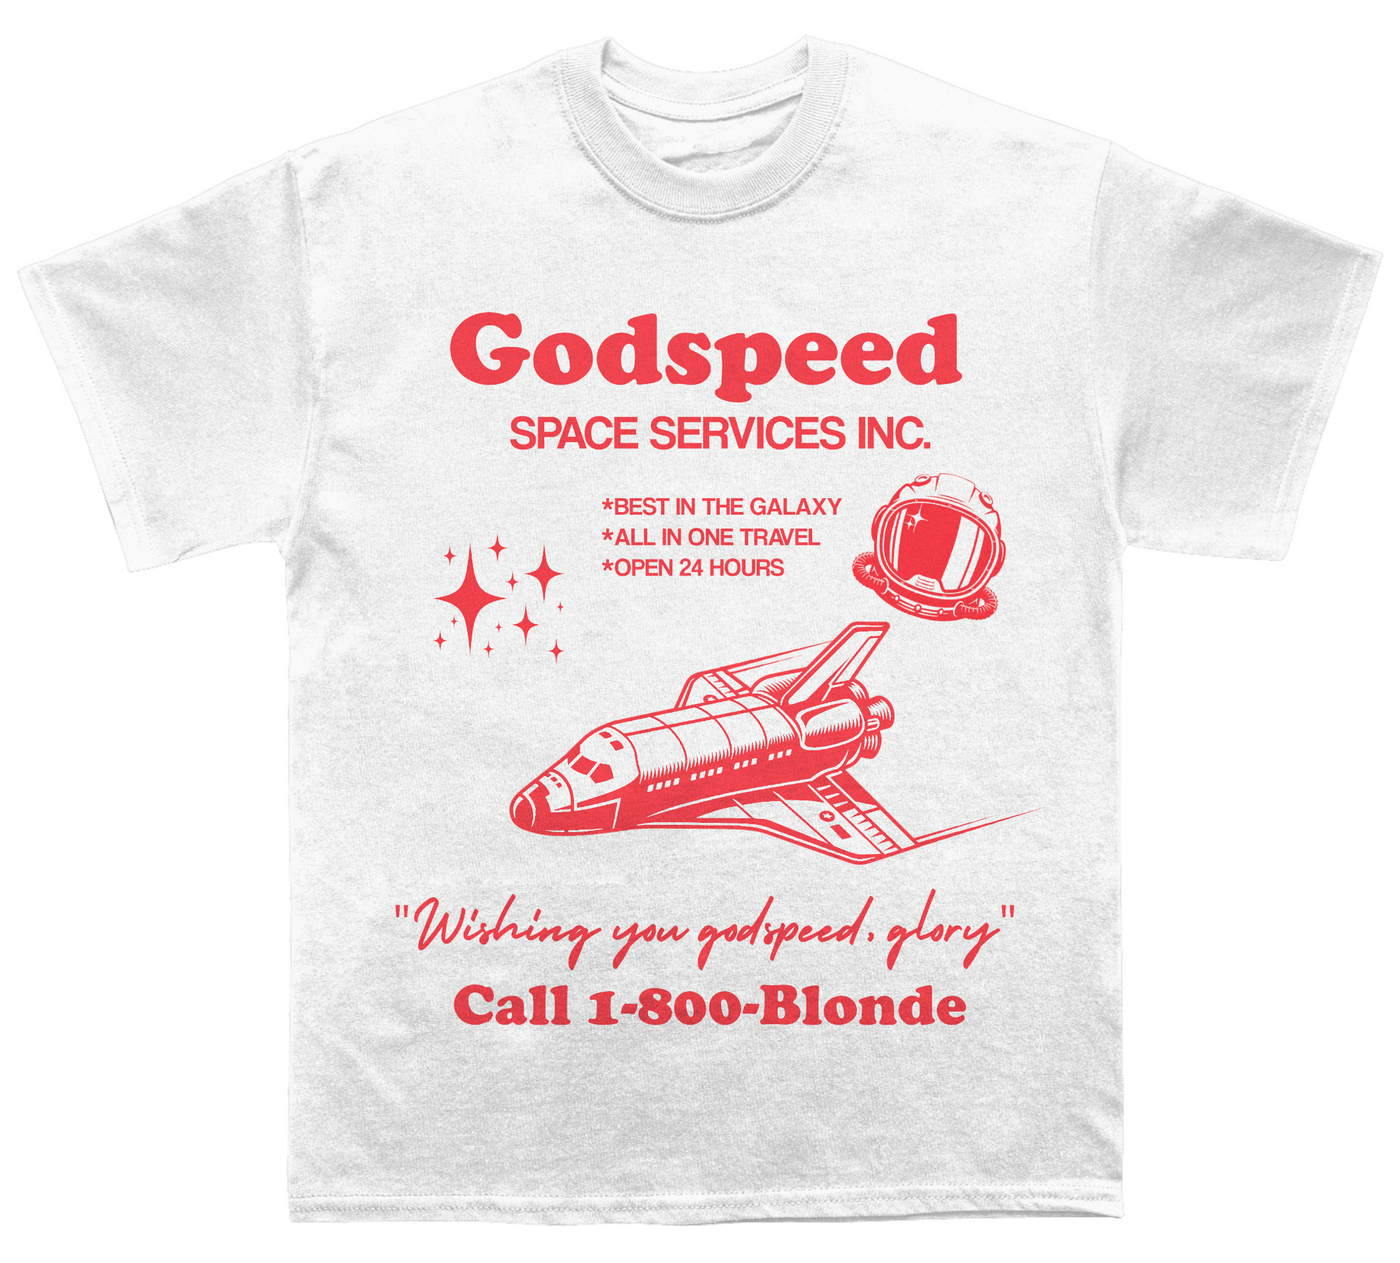 Godspeed Space Services T-shirt